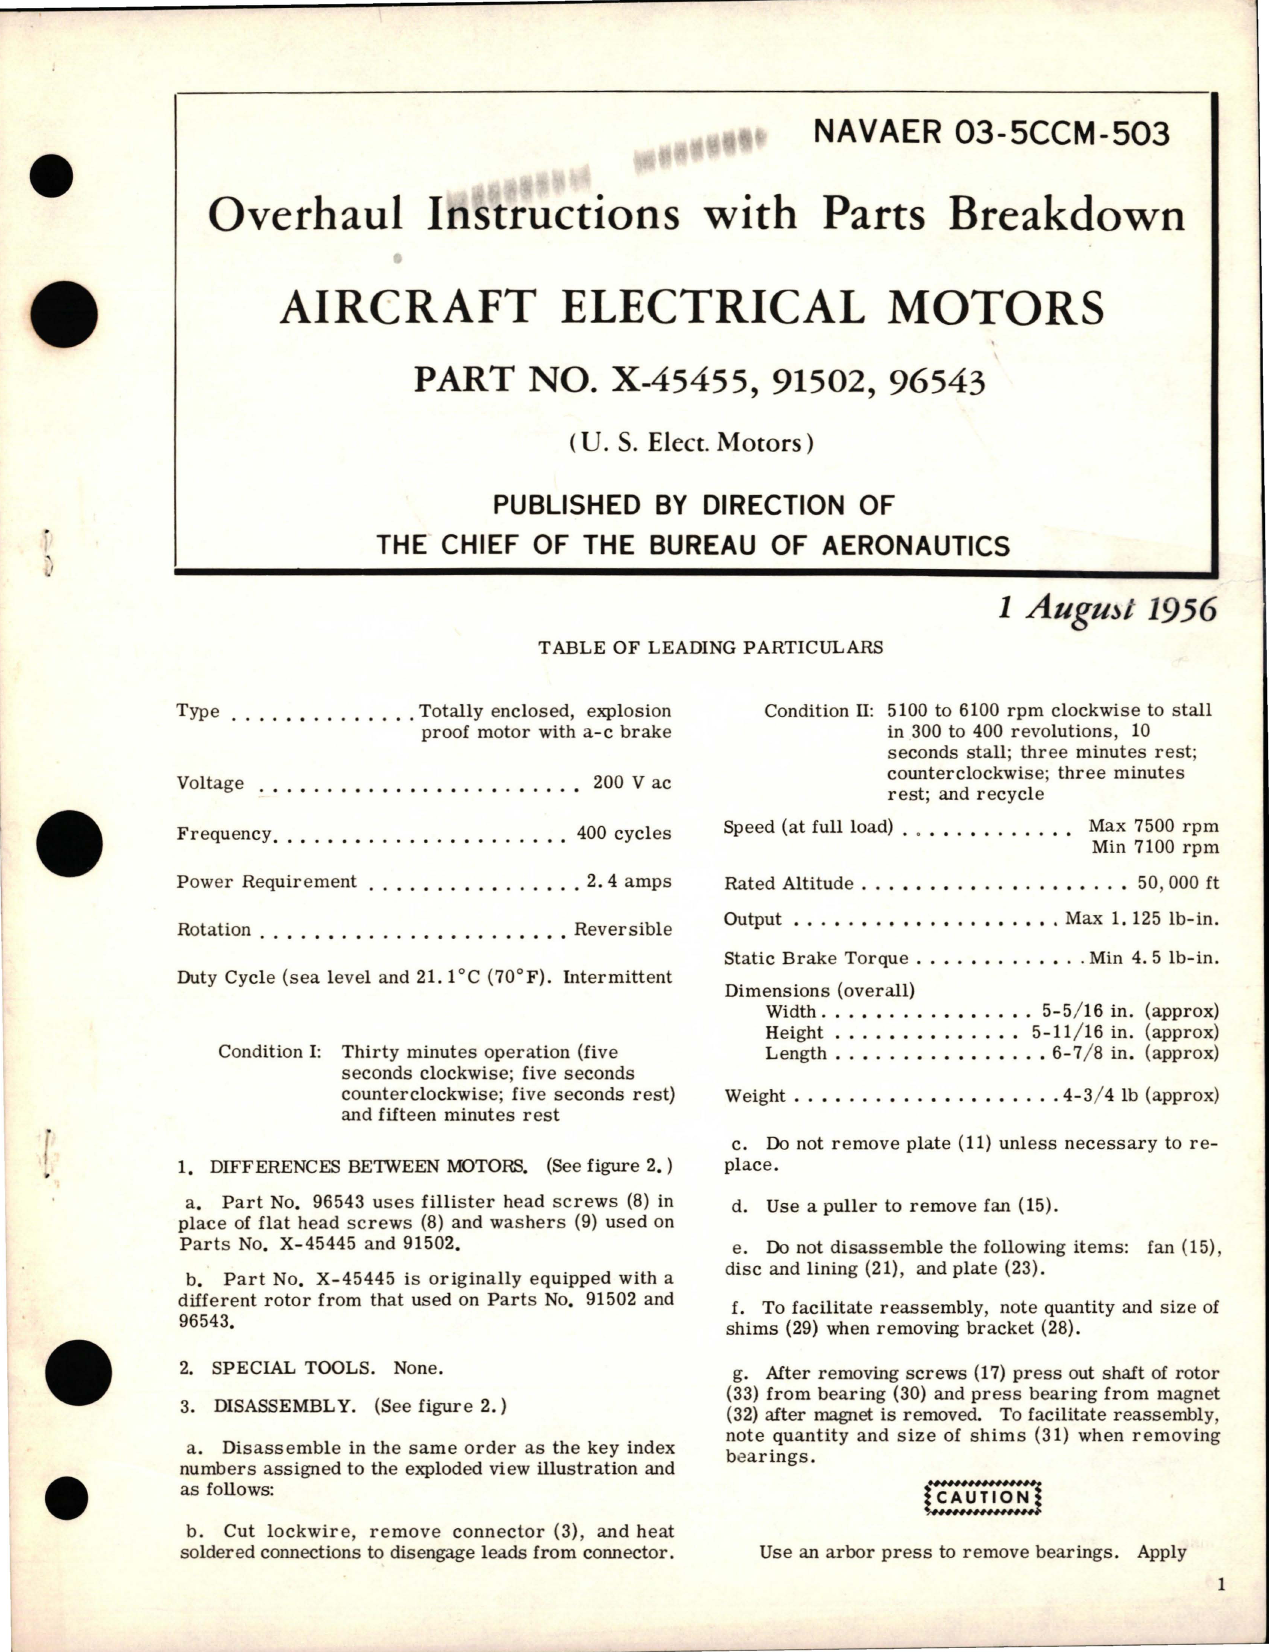 Sample page 1 from AirCorps Library document: Overhaul Instructions with Parts Breakdown for Electric Motors - Parts X-45455, 91502, and 96543